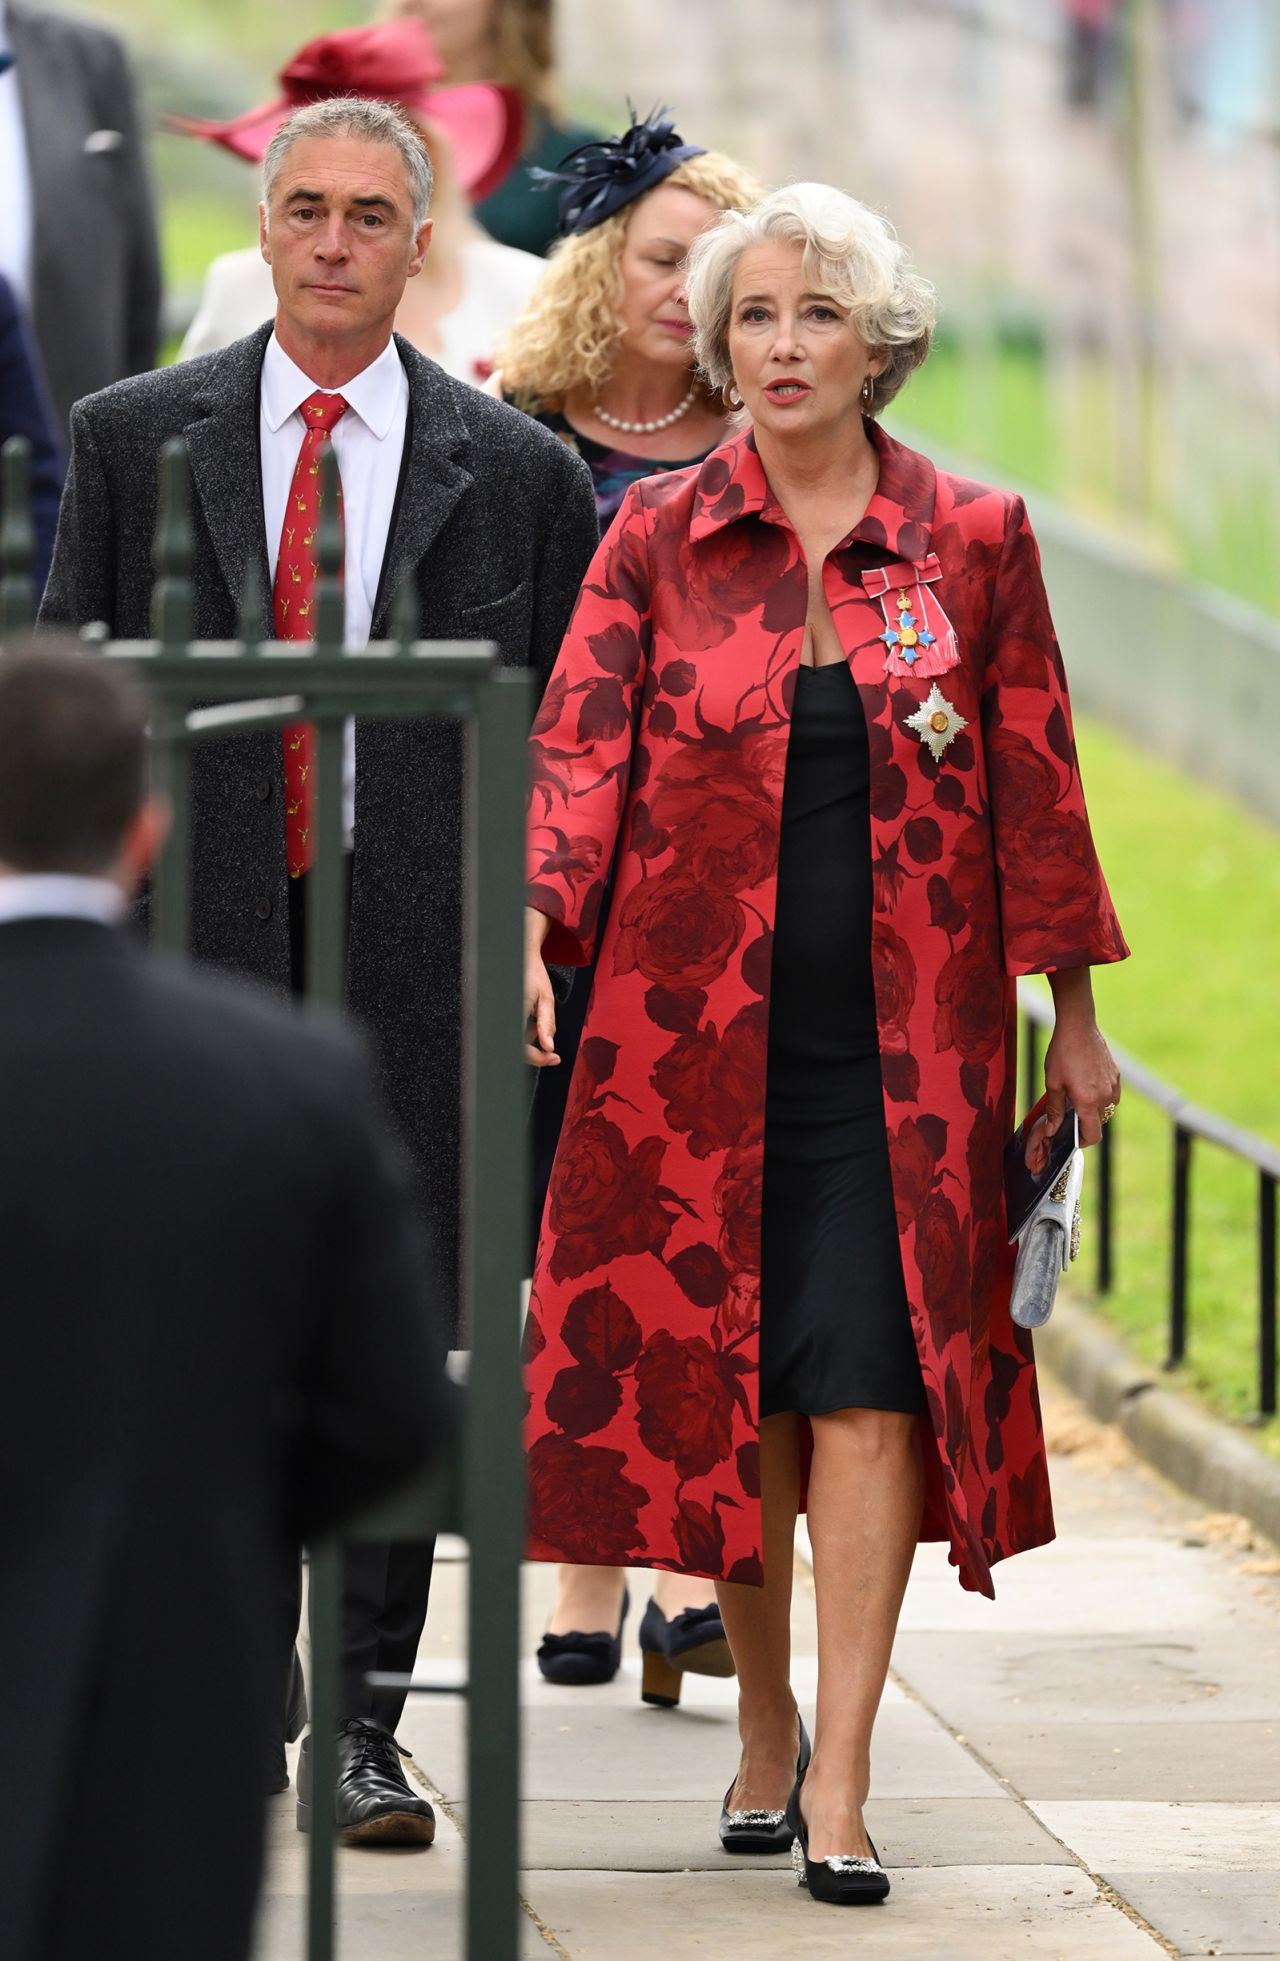 Greg Wise and Emma Thompson arrive at Westminster Abbey for the Coronation of King Charles III and Queen Camilla.